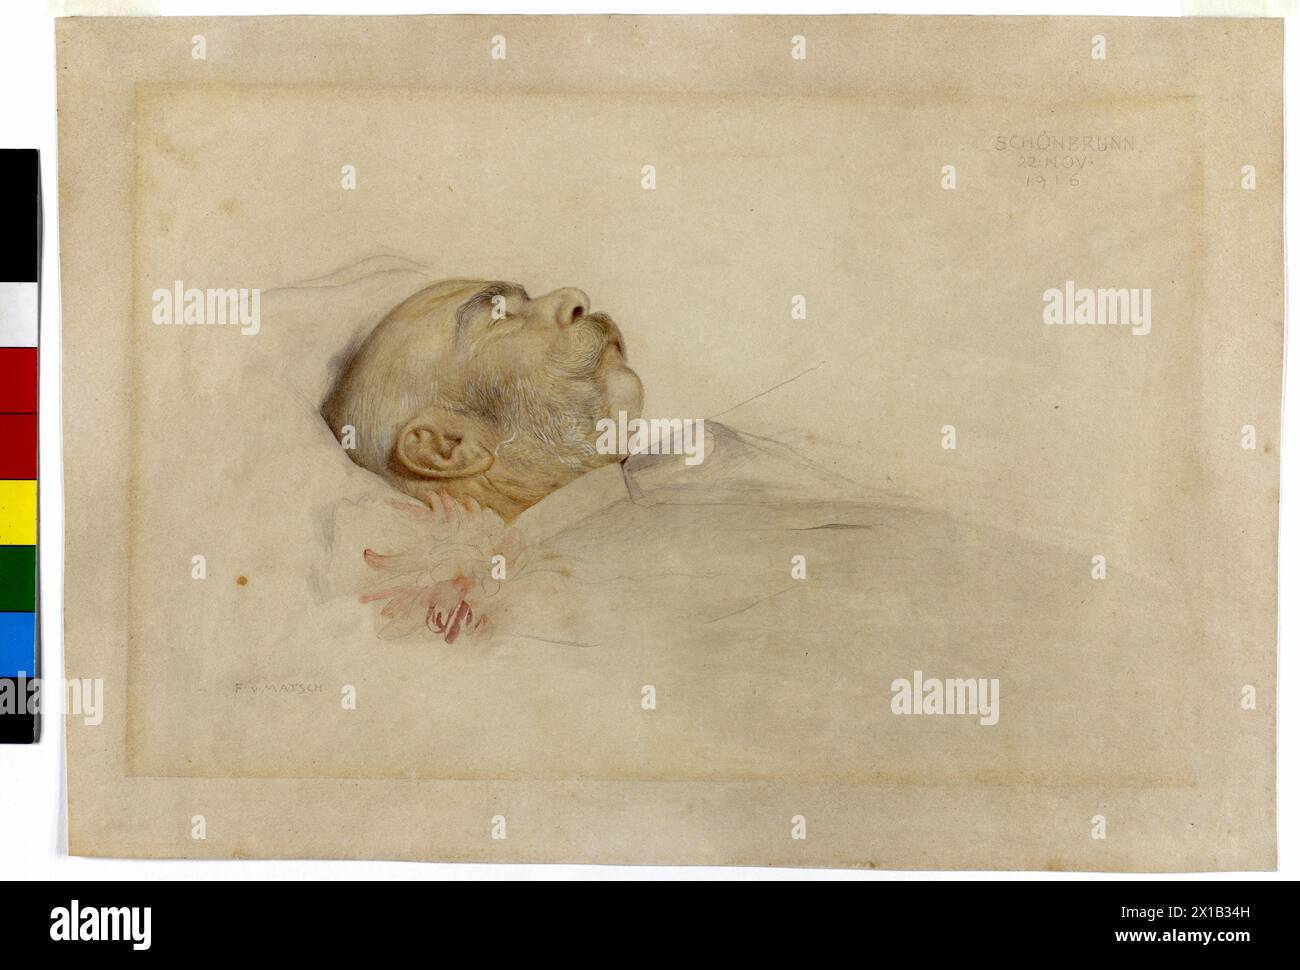 Emperor Franz Joseph I on the deathbed, drawing by Franz of sludge. watercolour and opaque white across pencil on cardboard. signed 'F. V. MATSCH' and dated: 'SCHOeNBRUNN 22. NOV. 1916', The Emperor on the deathbed, in the foreground any Mutti. The artist was specifically to Schoenbrunn Palace bespeaking, around the picture of the emperor making. notation : sludge conducted two frame von, any strong effect version decide oneself in Schoenbrunn Palace (oil on package, inventory number 820-1 / 1 / 72) and any layout for Katharina Schratt, the there sheet, 22.11.1916 - 19161122 PD0005 - Rechteinf Stock Photo